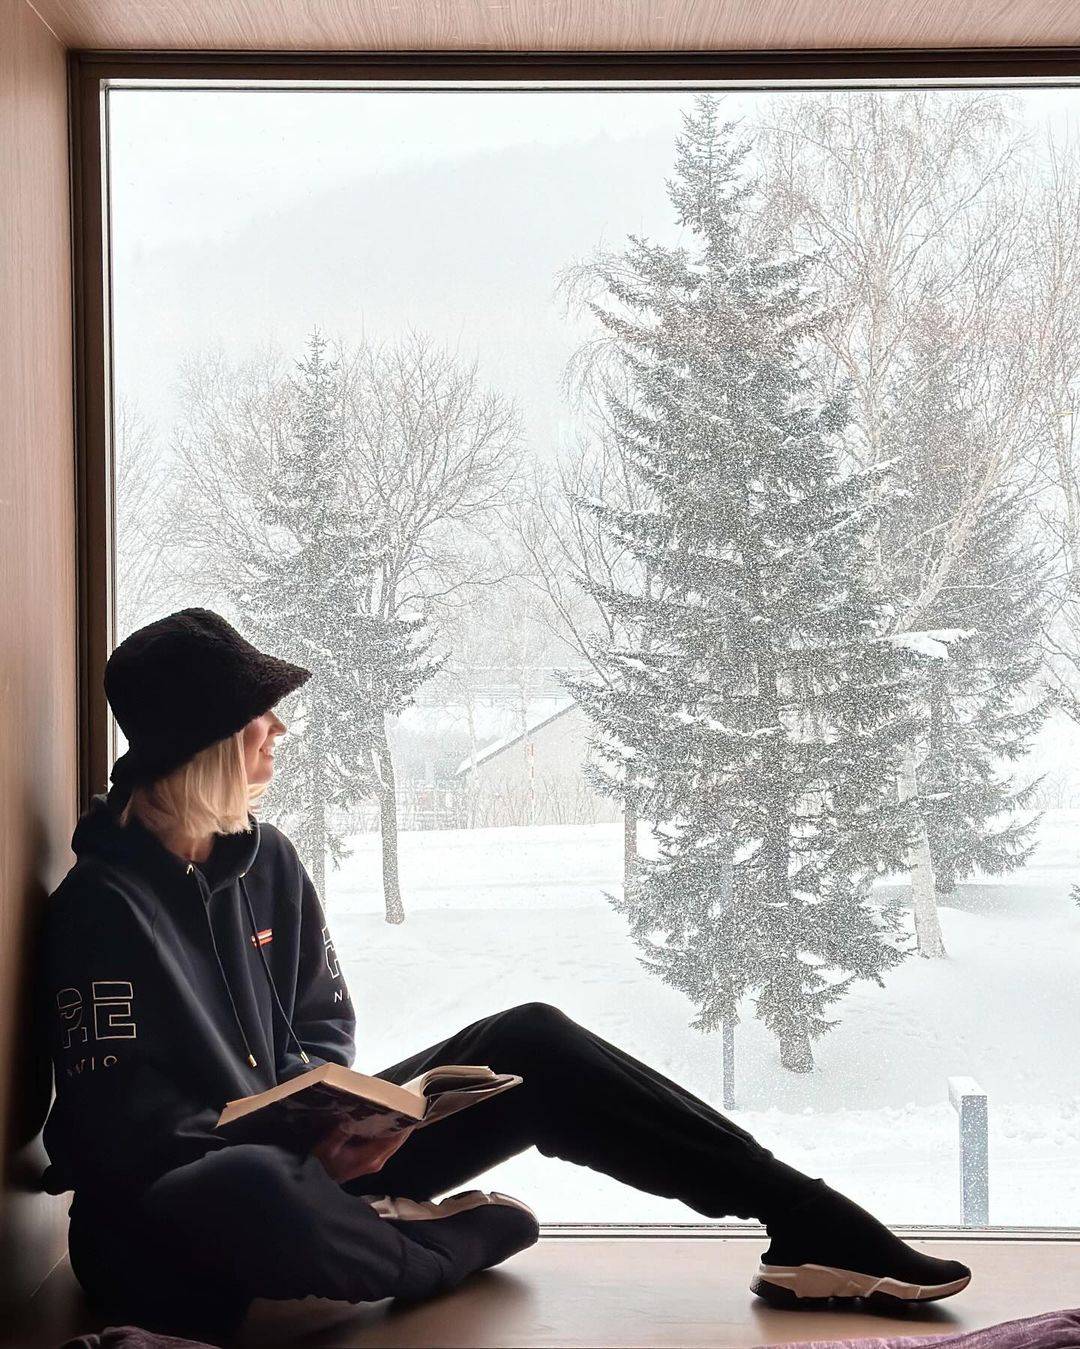 Girl sitting next to a window, with snow outside